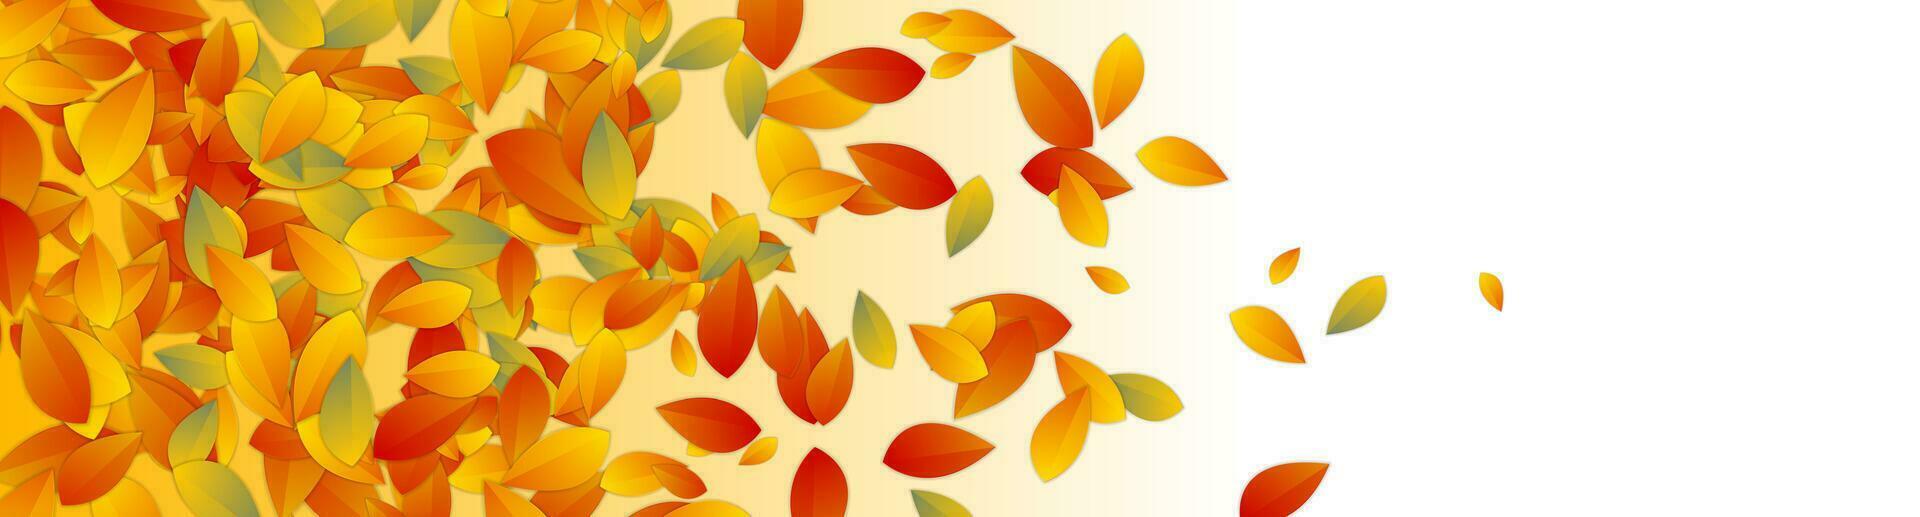 Autumn abstract banner design with colorful leaves vector